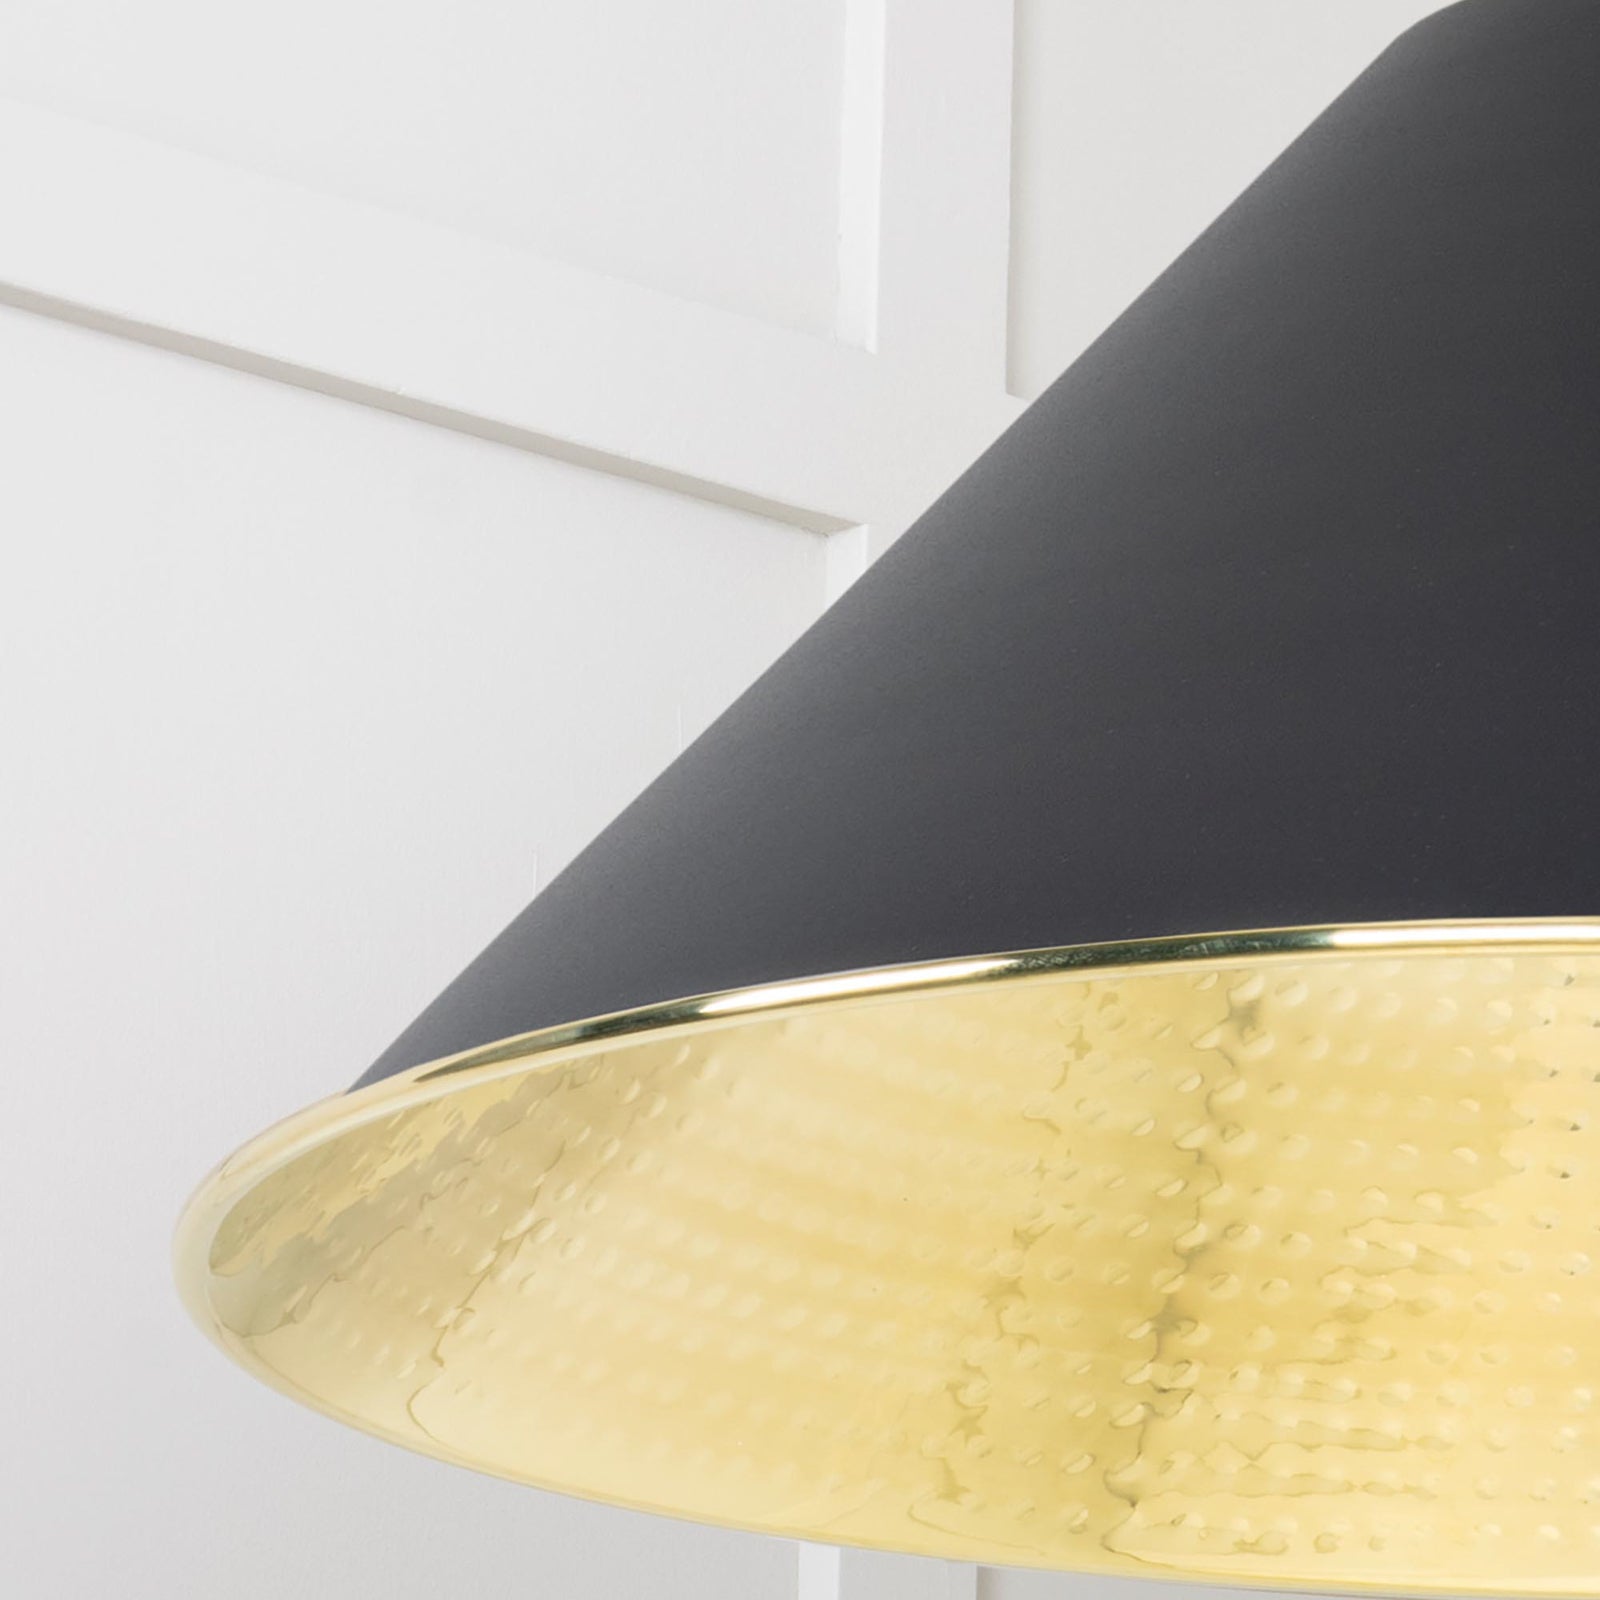 SHOW Close Up Image of Hockley Ceiling Light in Elan Black in Hammered Brass